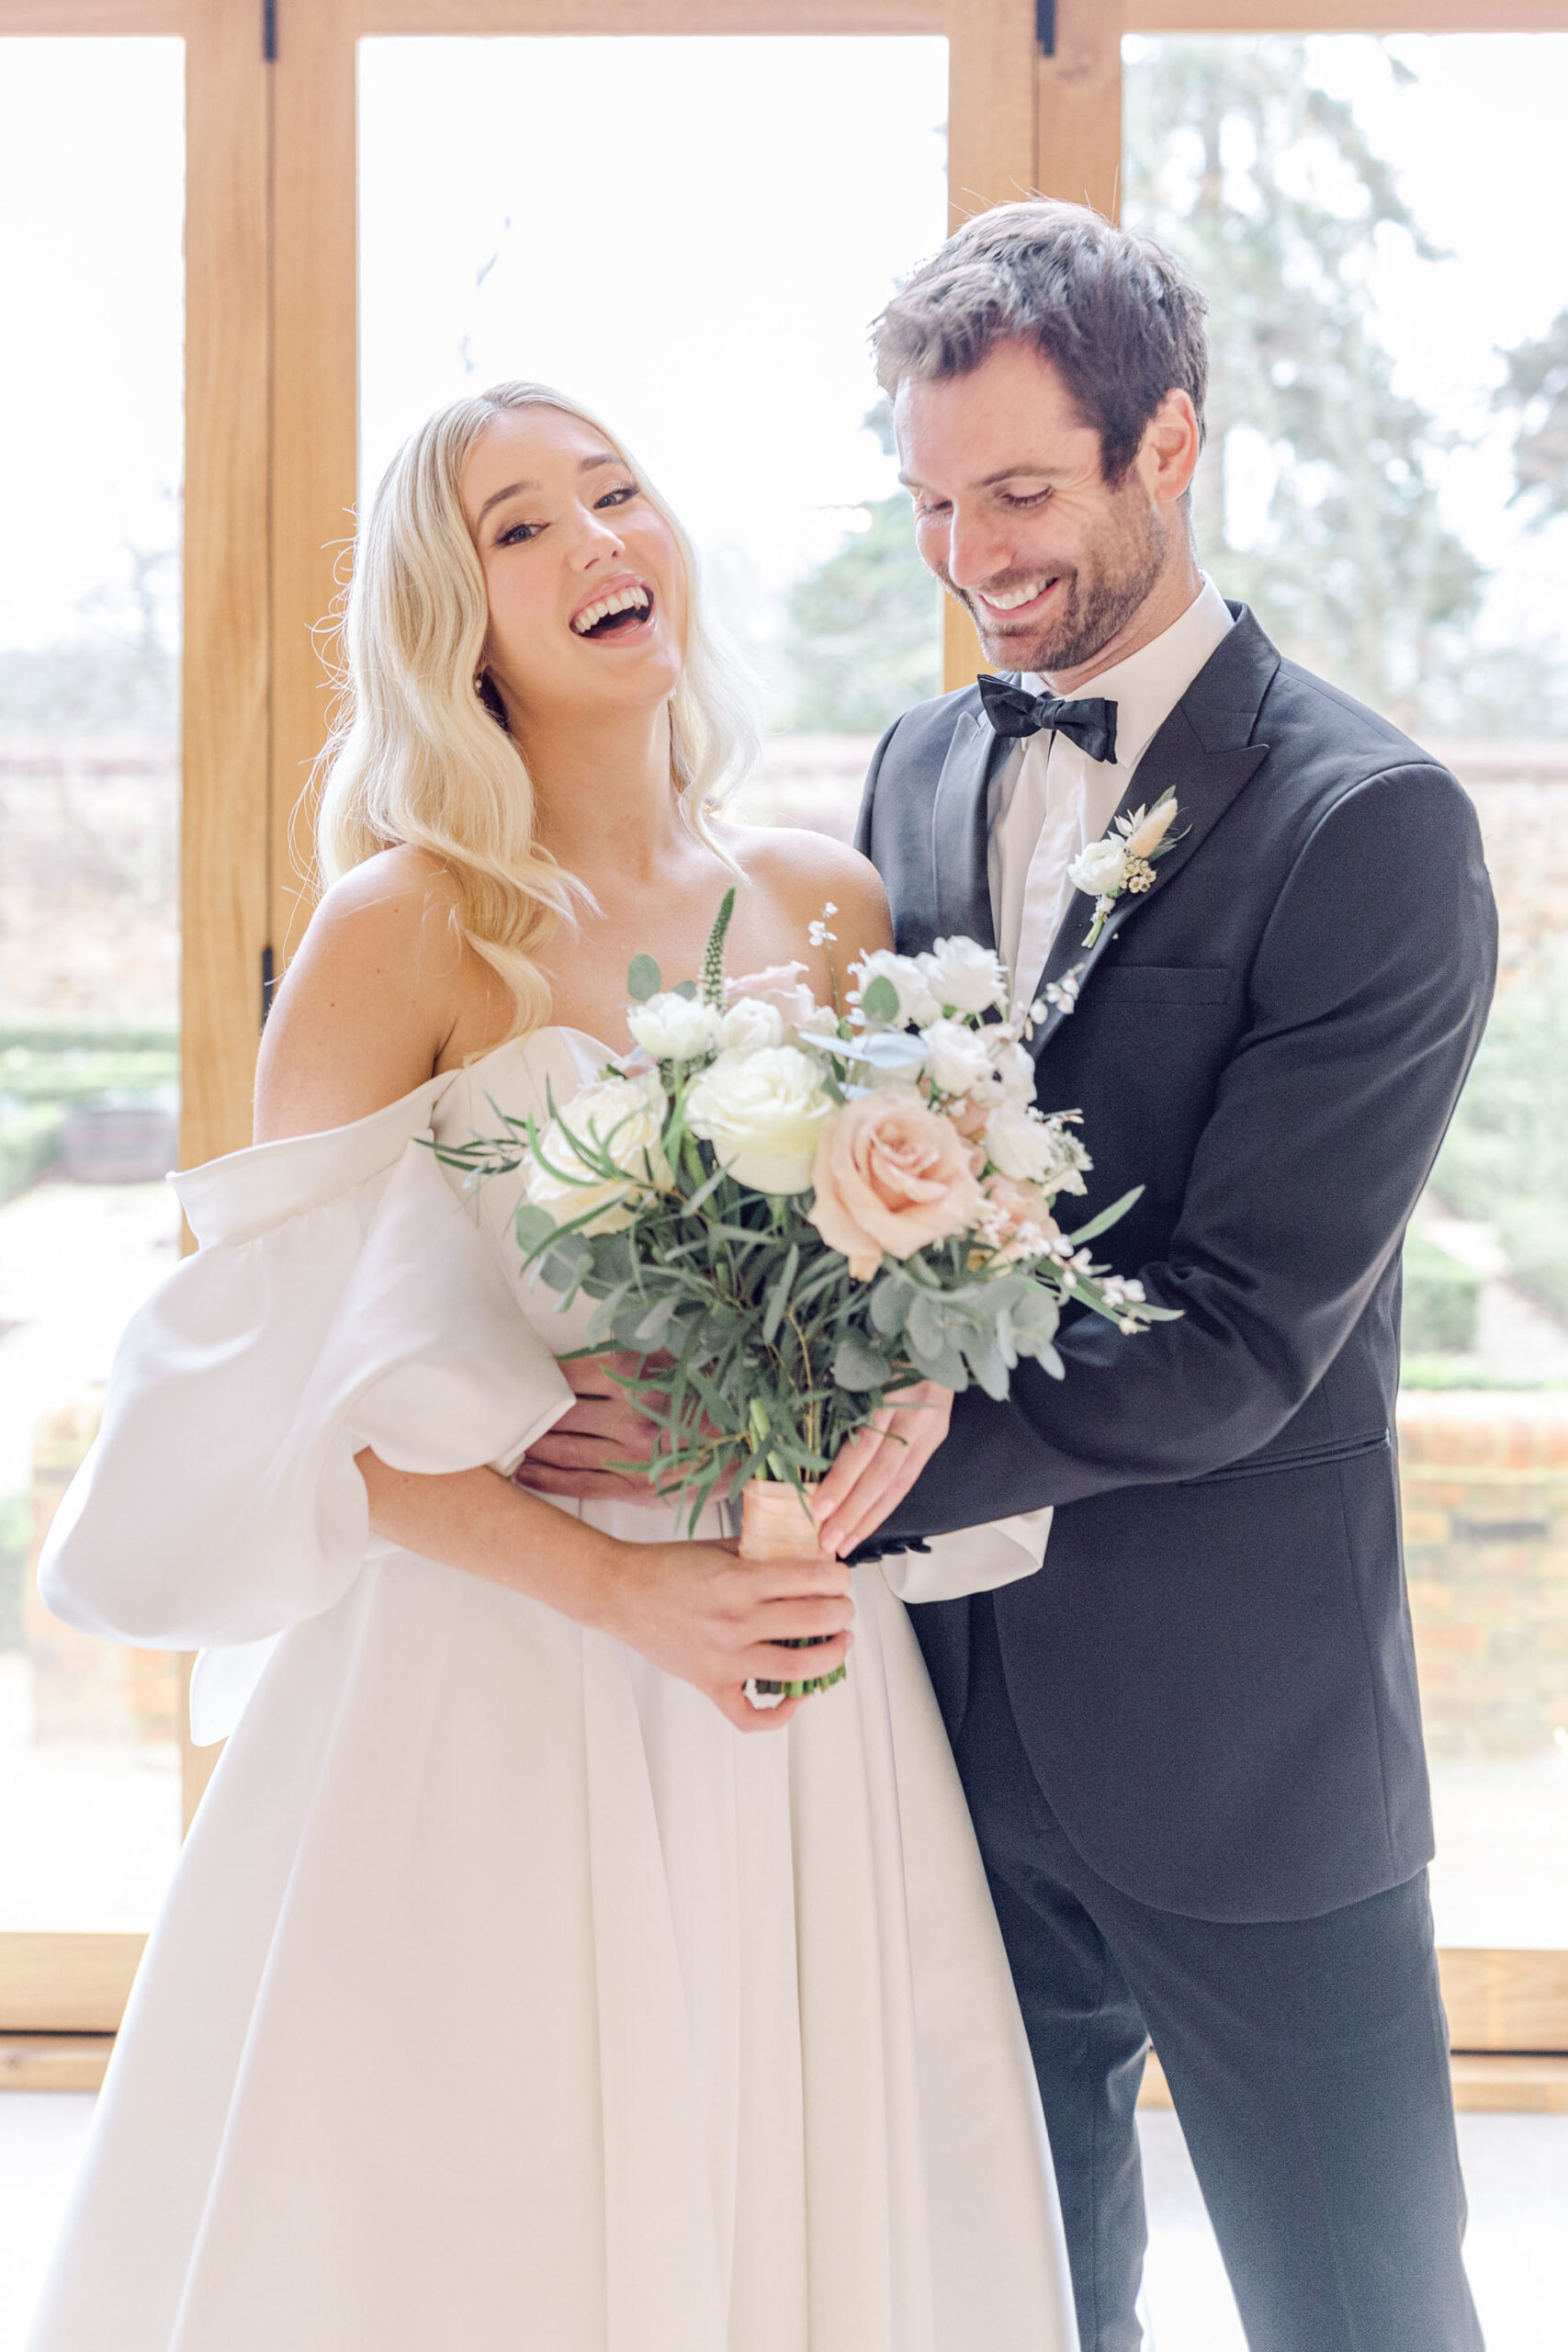 Model couple laughing together on a luxury wedding photoshoot. She's wearing a white dress and he's in black tie. They're holding a bouquet of white and blush roses. Image by Natalie D Photography